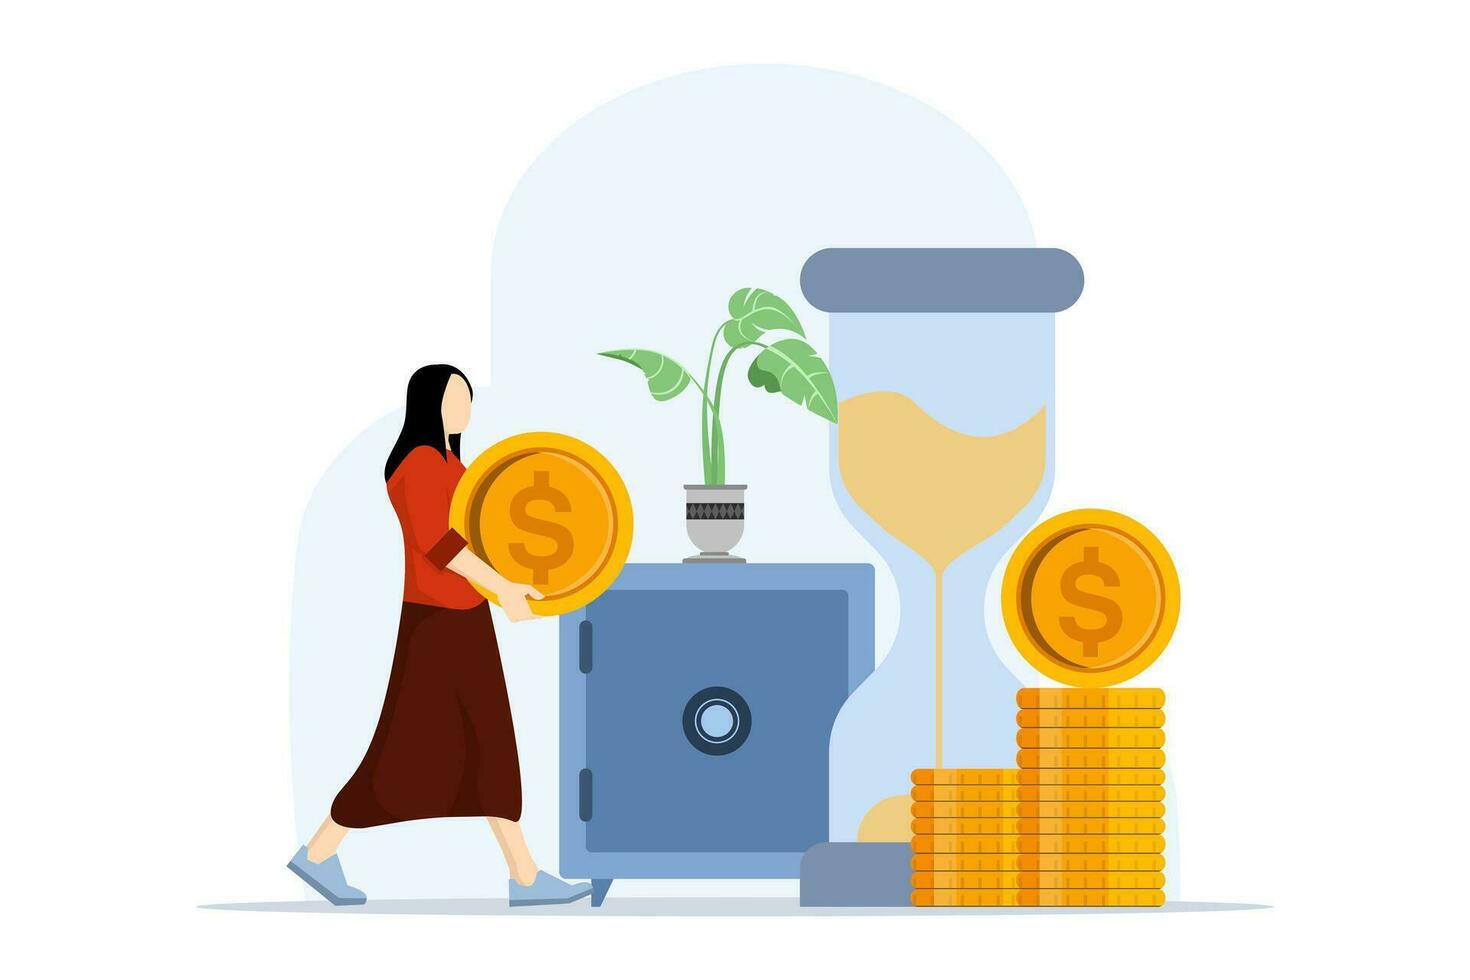 Money saving and profit concept, Financial goals, character carrying coins to save, Personal financial management and financial literacy. wealth management and investment plans. vector illustration.